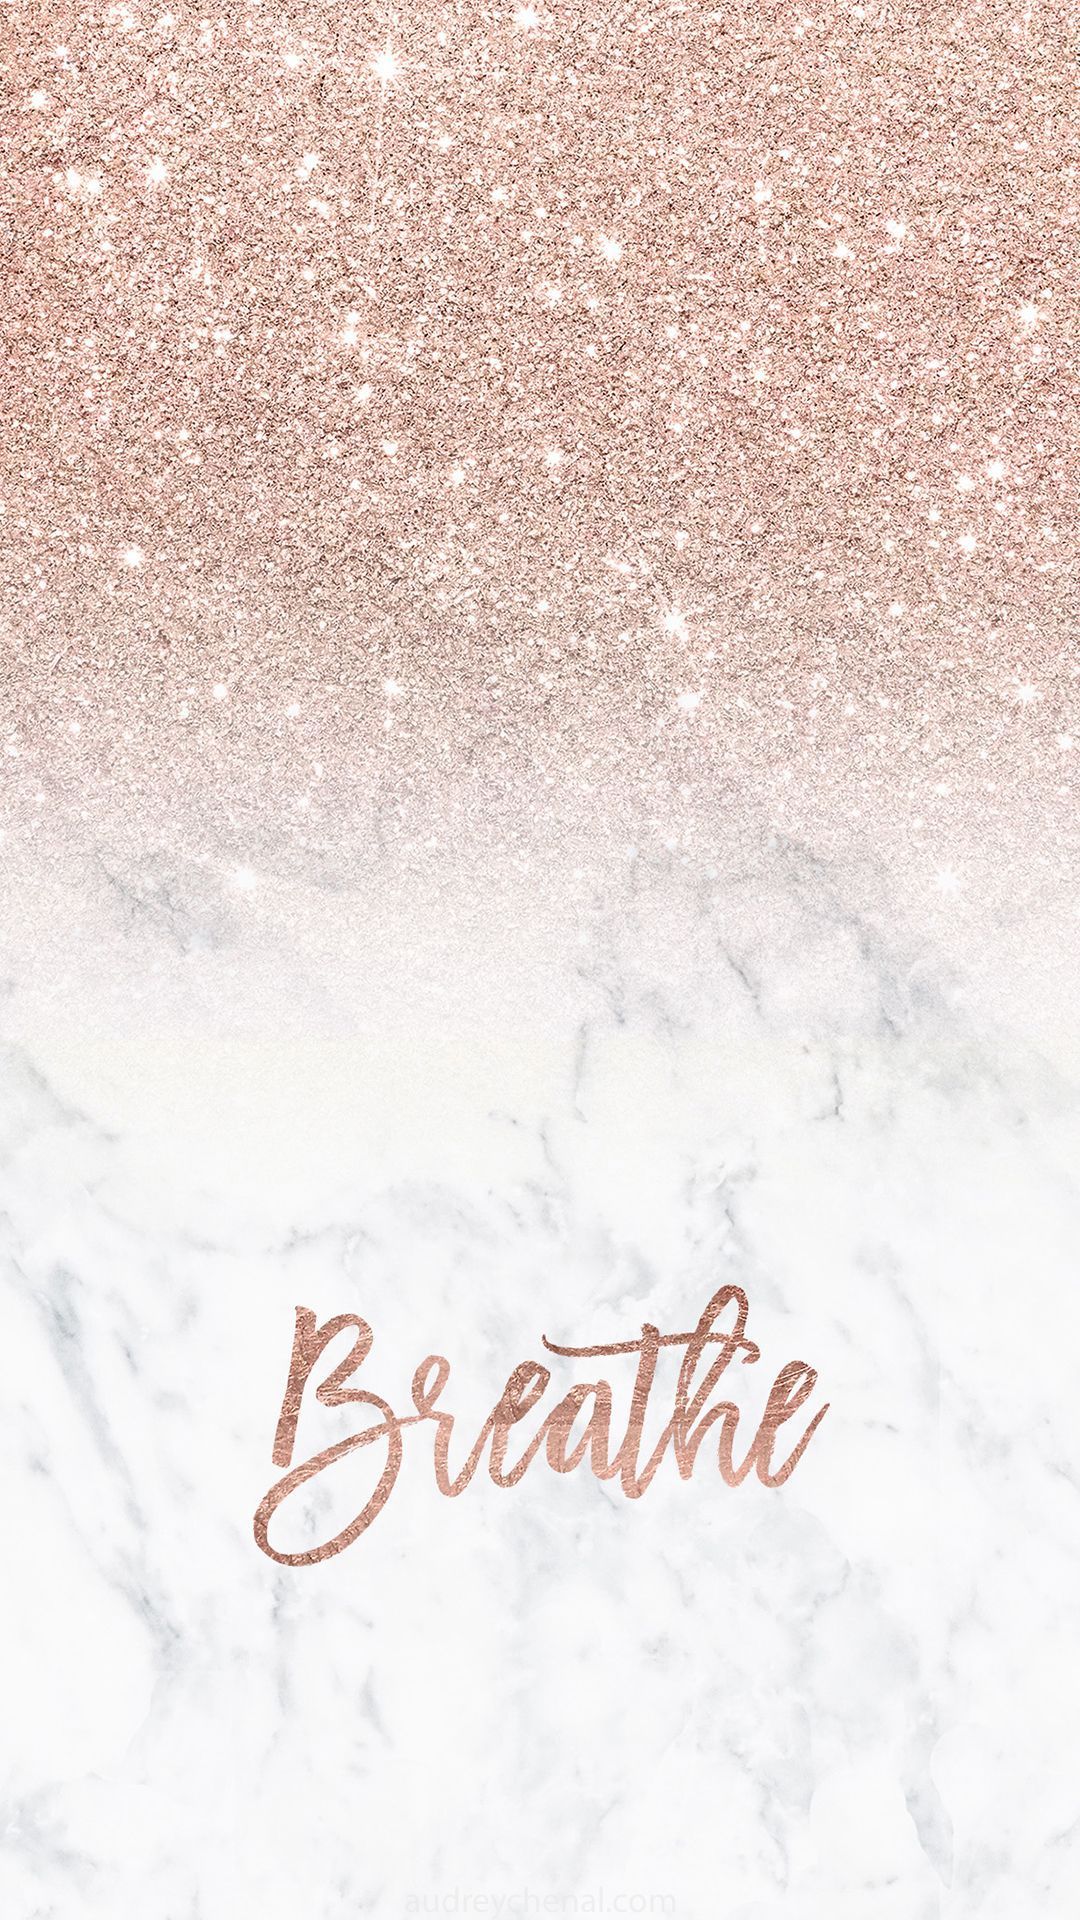 Rose gold and marble wallpaper for your phone with the word 